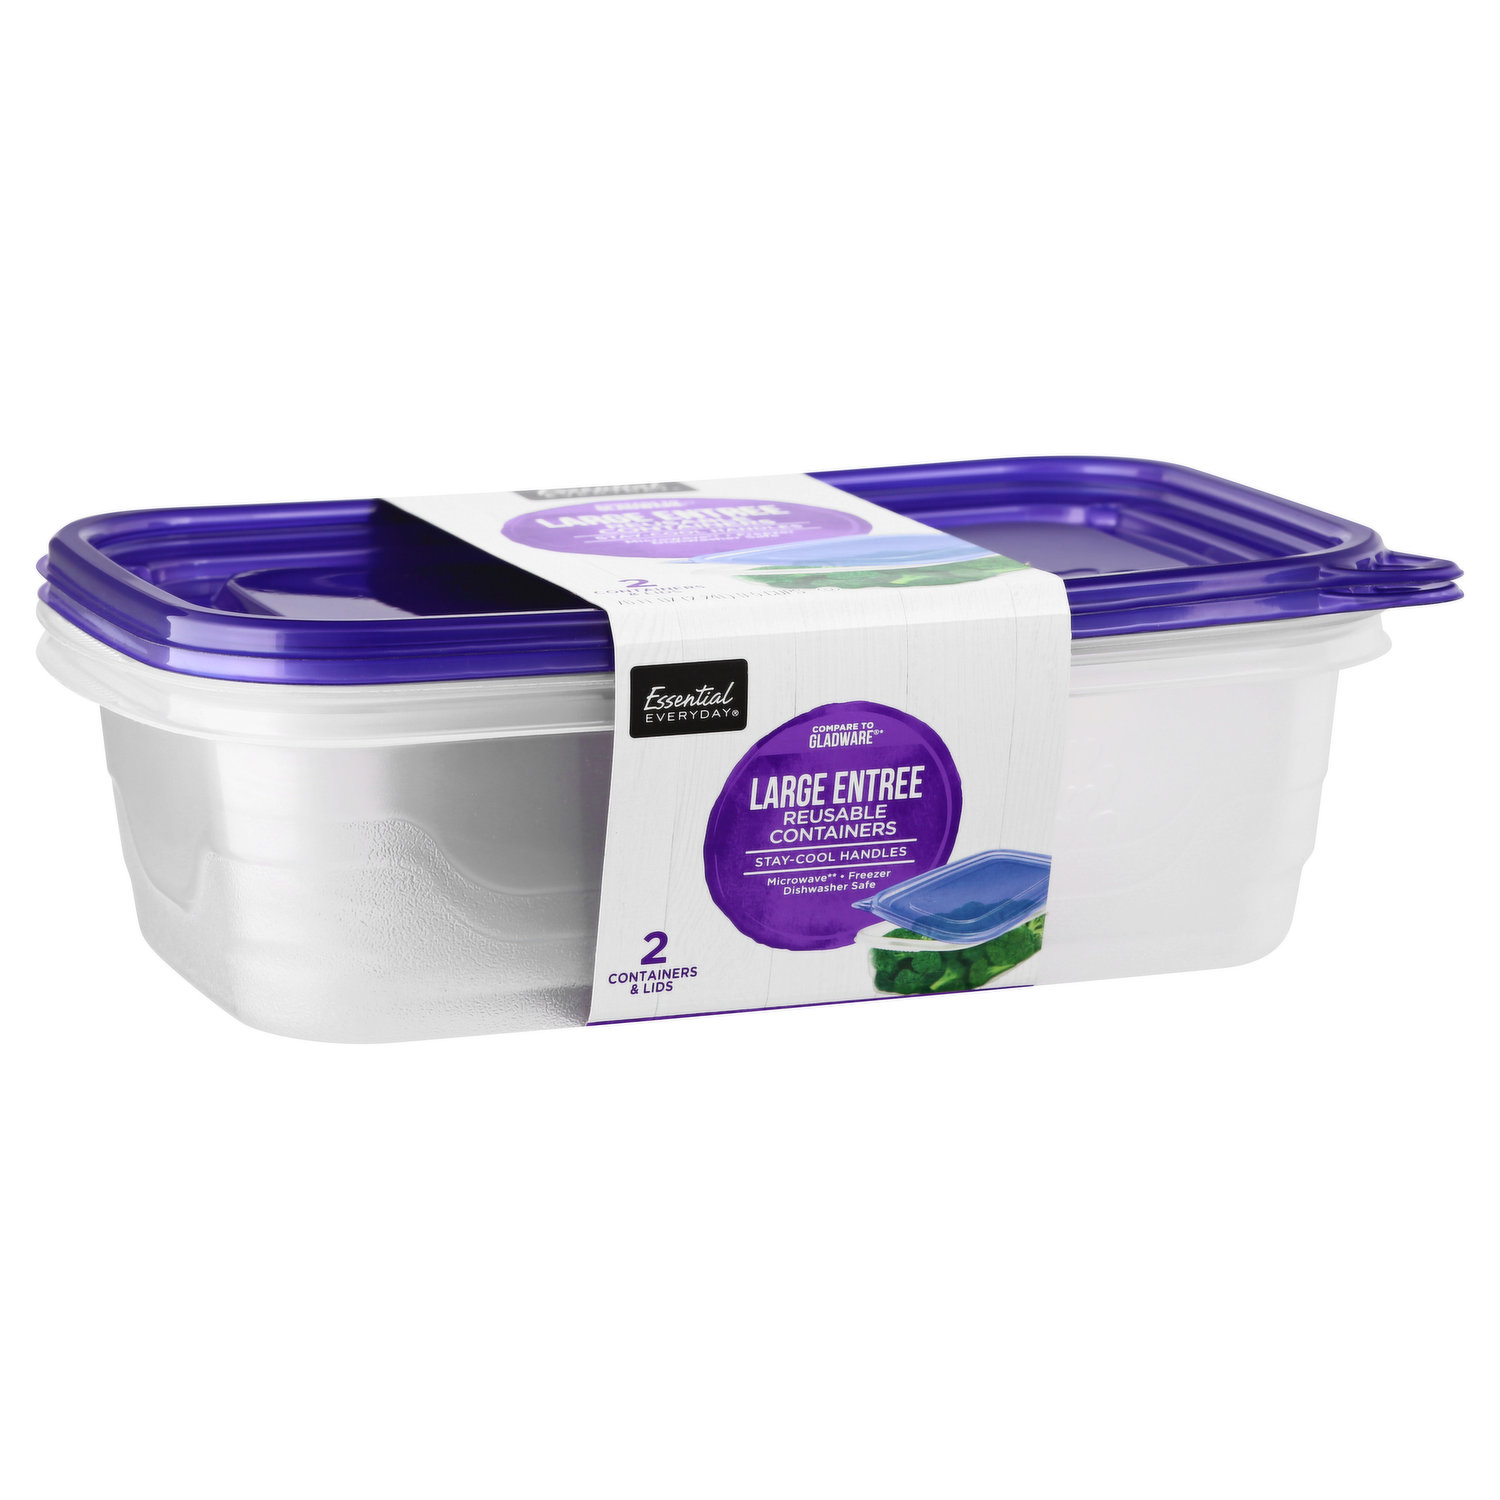 Essential Everyday Reusable Containers, Twist & Store, 4 Fluid Ounce